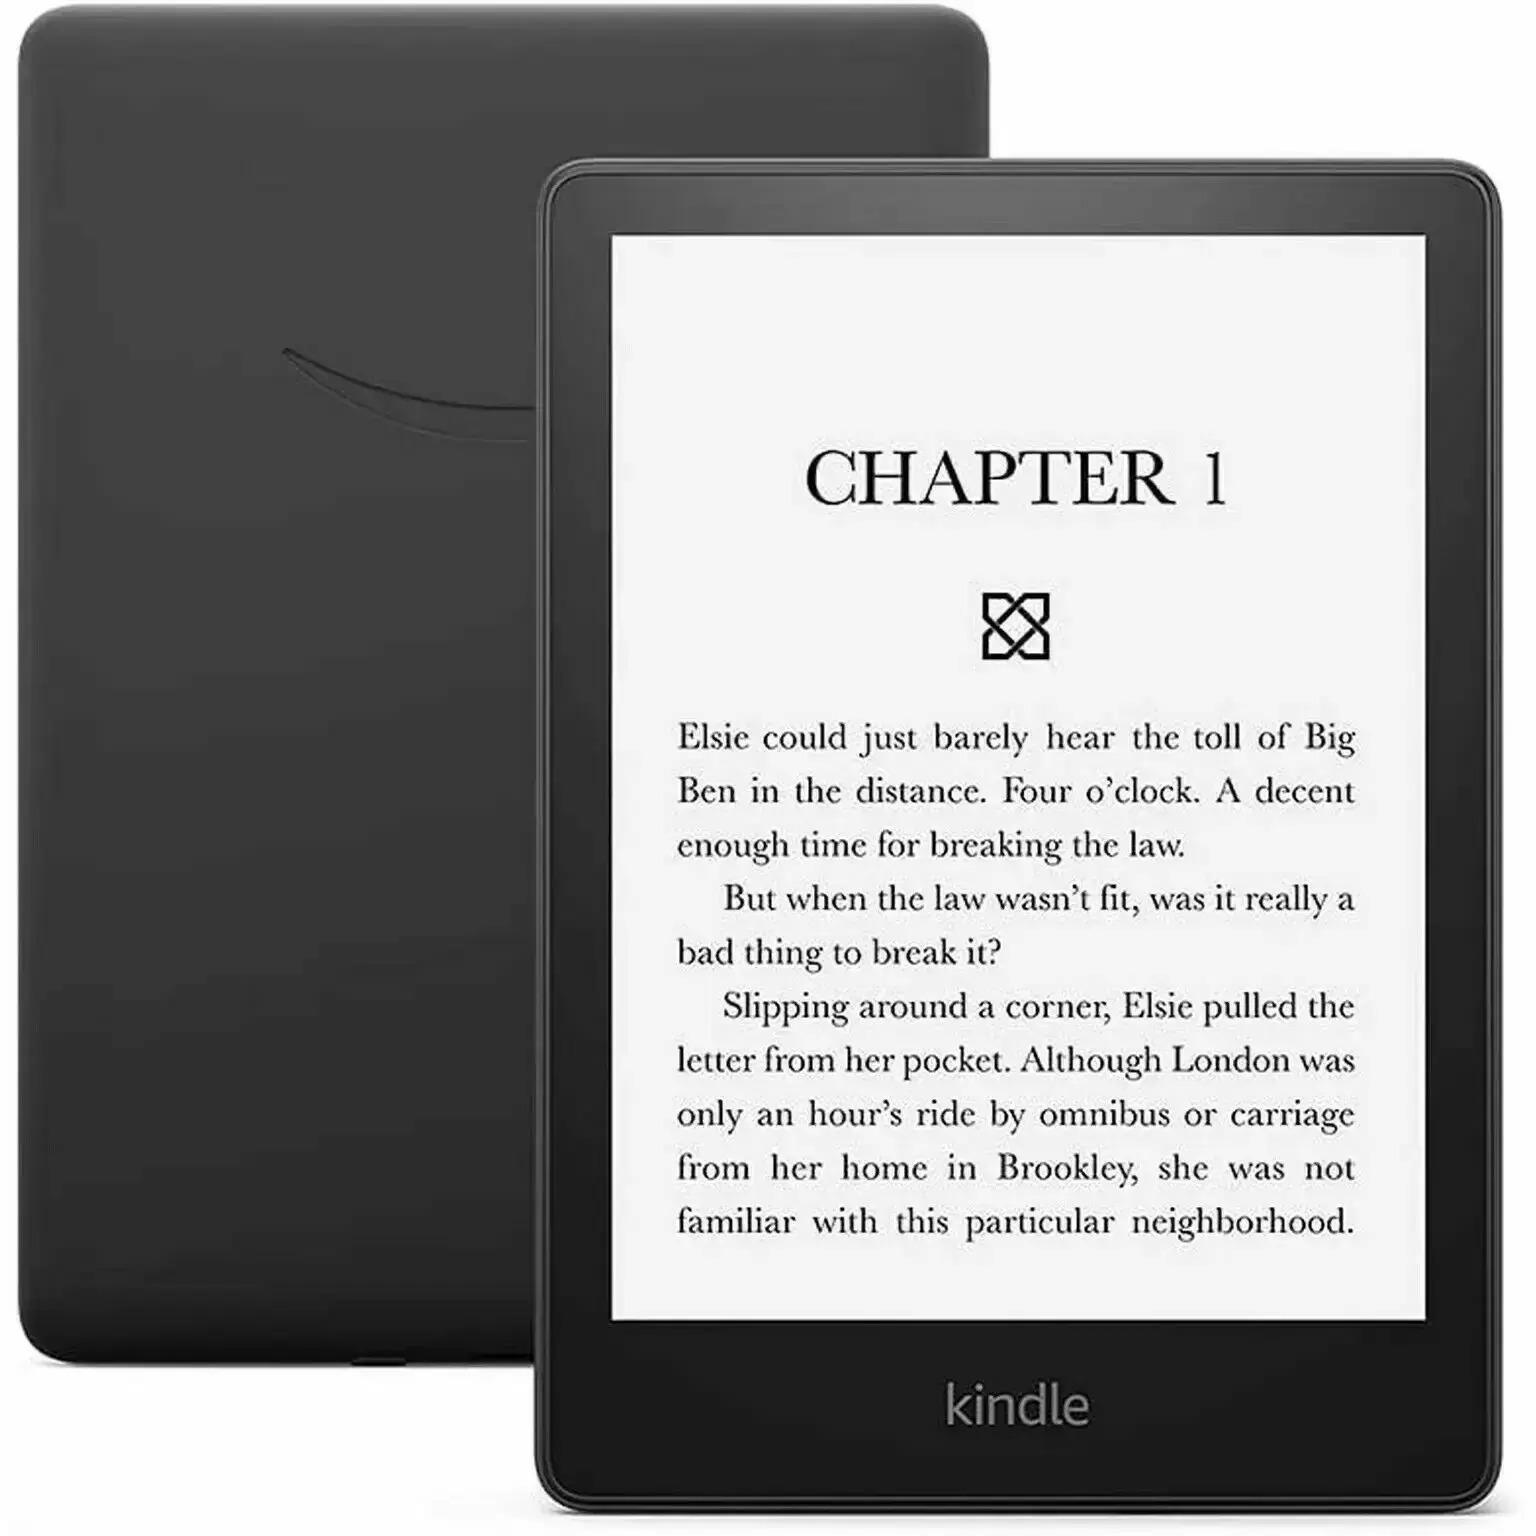 All New Amazon Kindle Paperwhite 6.8in 8GB e-Reader for $99.99 Shipped